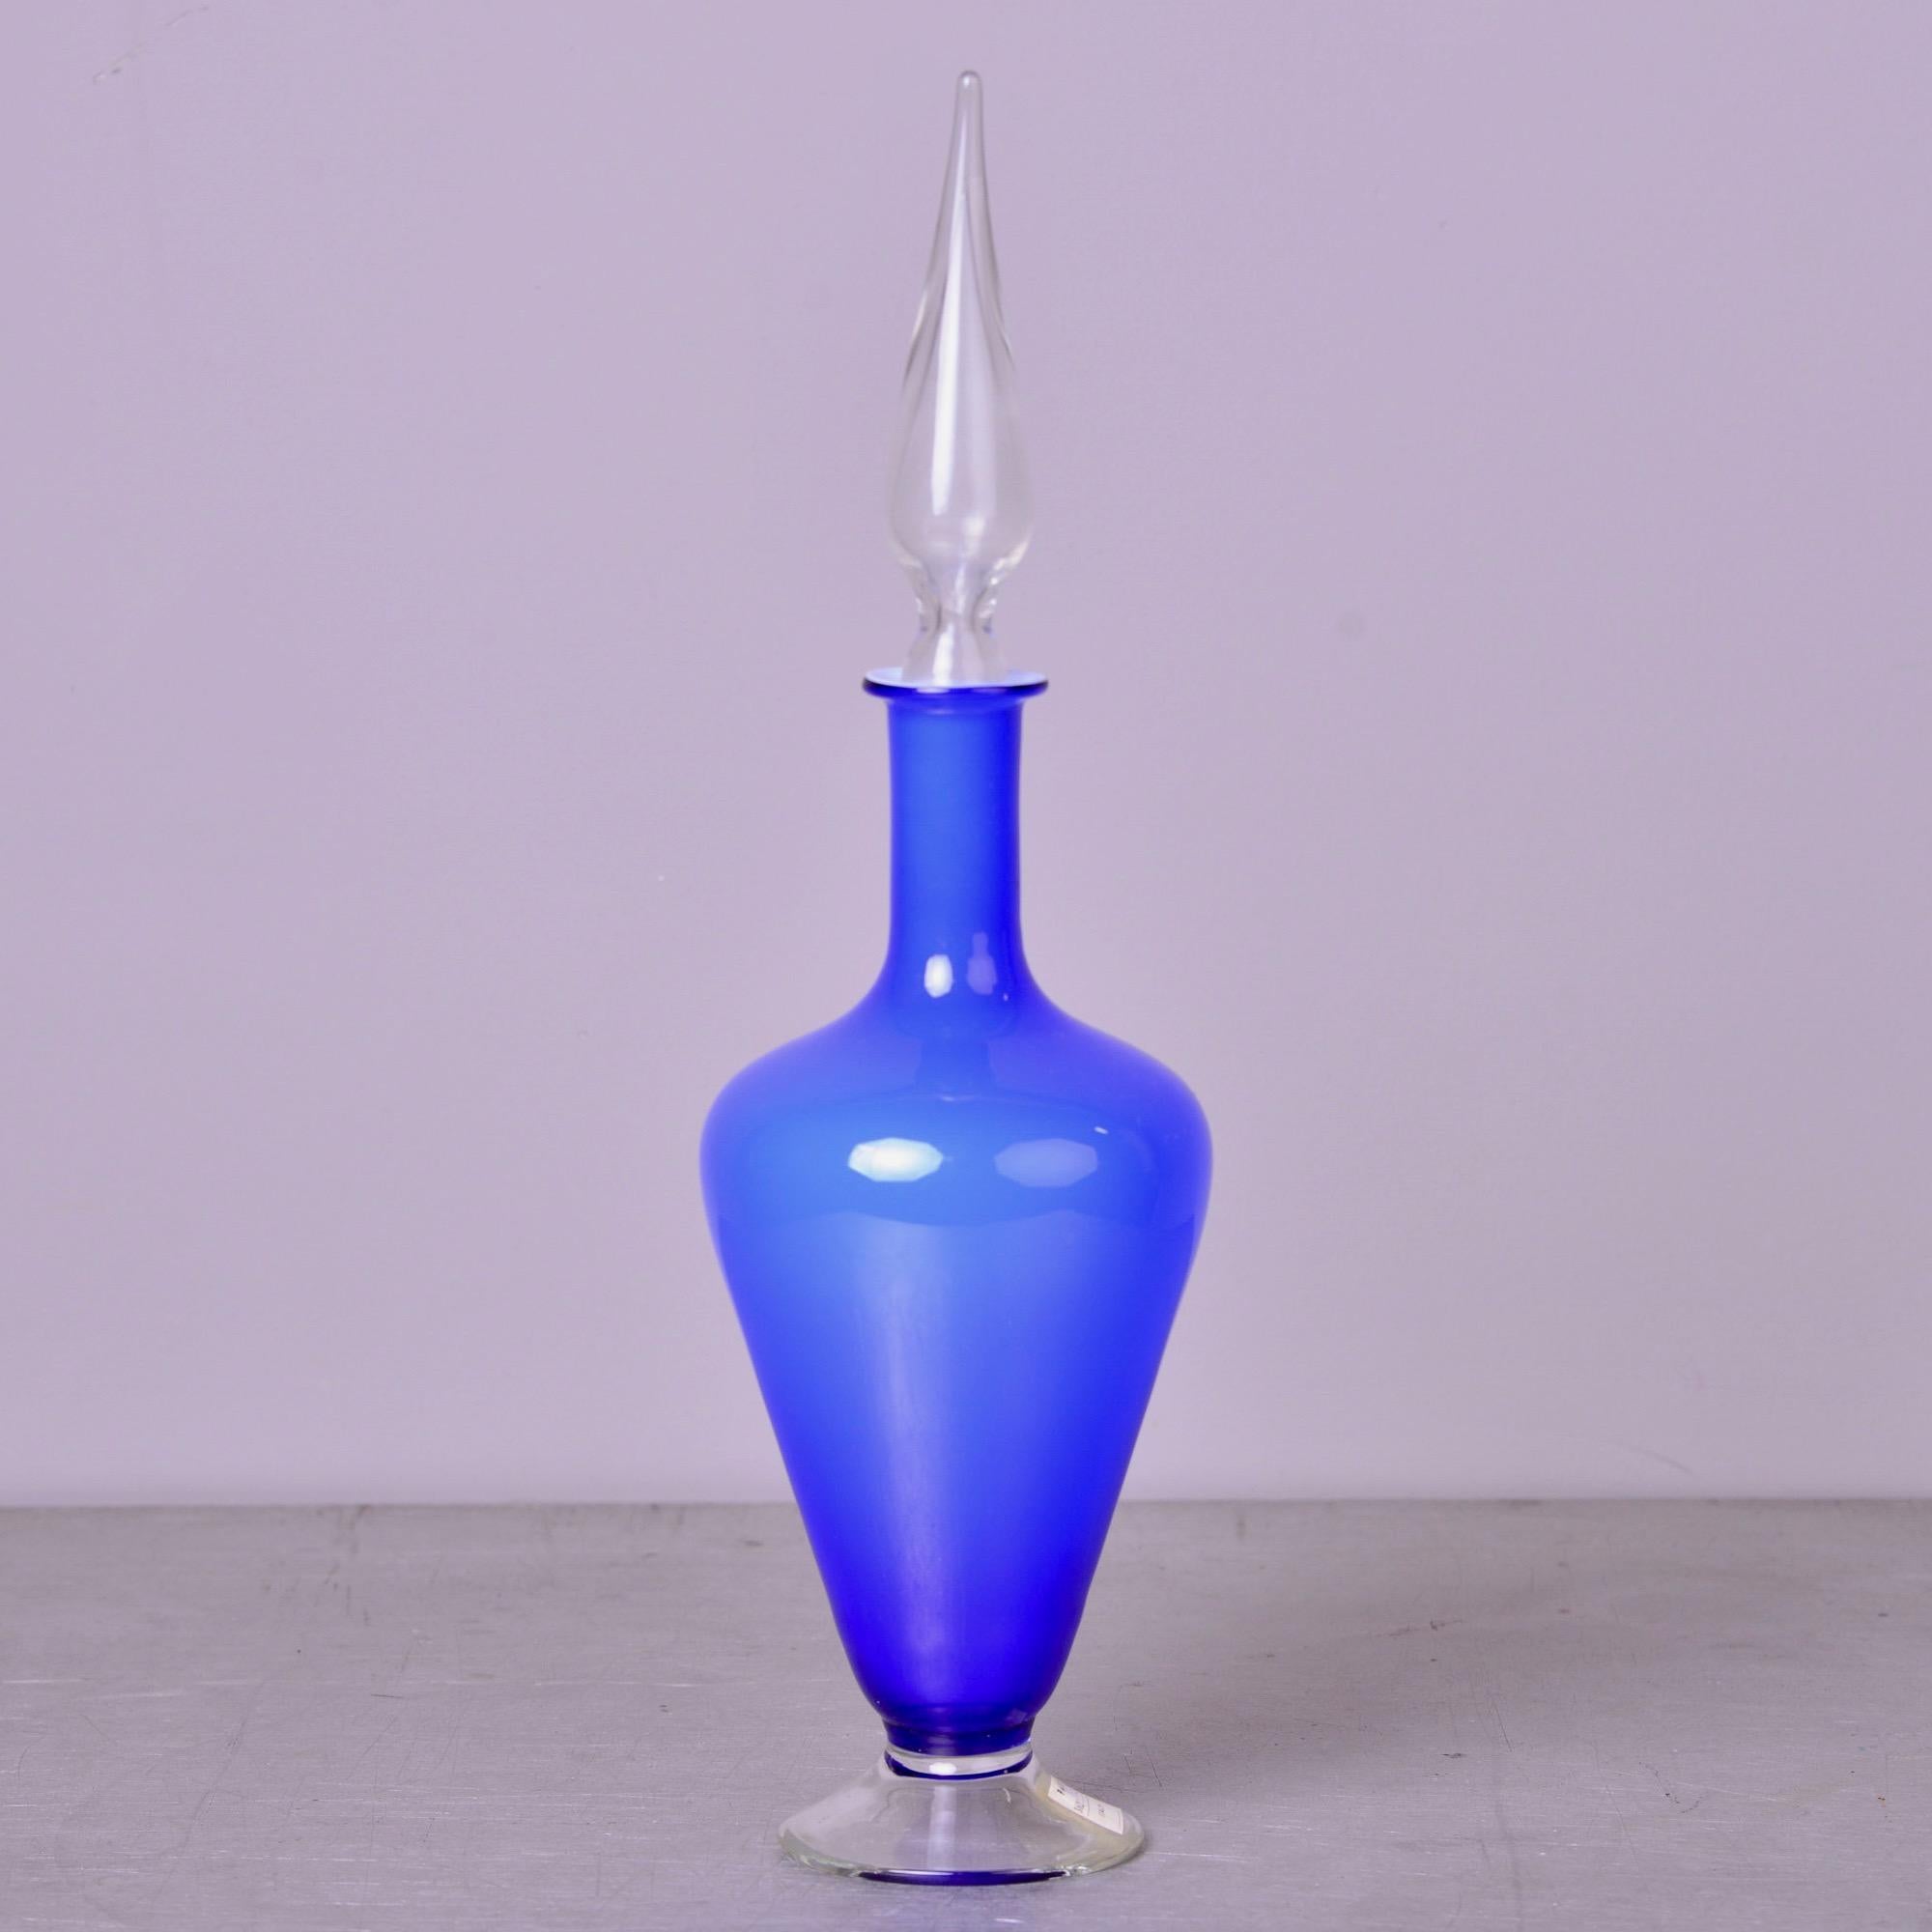 Circa 1960s new old stock tall Murano glass blue bottle with clear pedestal base and stopper. Original retailer inventory tags and Balboa sticker. No flaws found. Multiple bottles in this style and color available at the time of this posting.